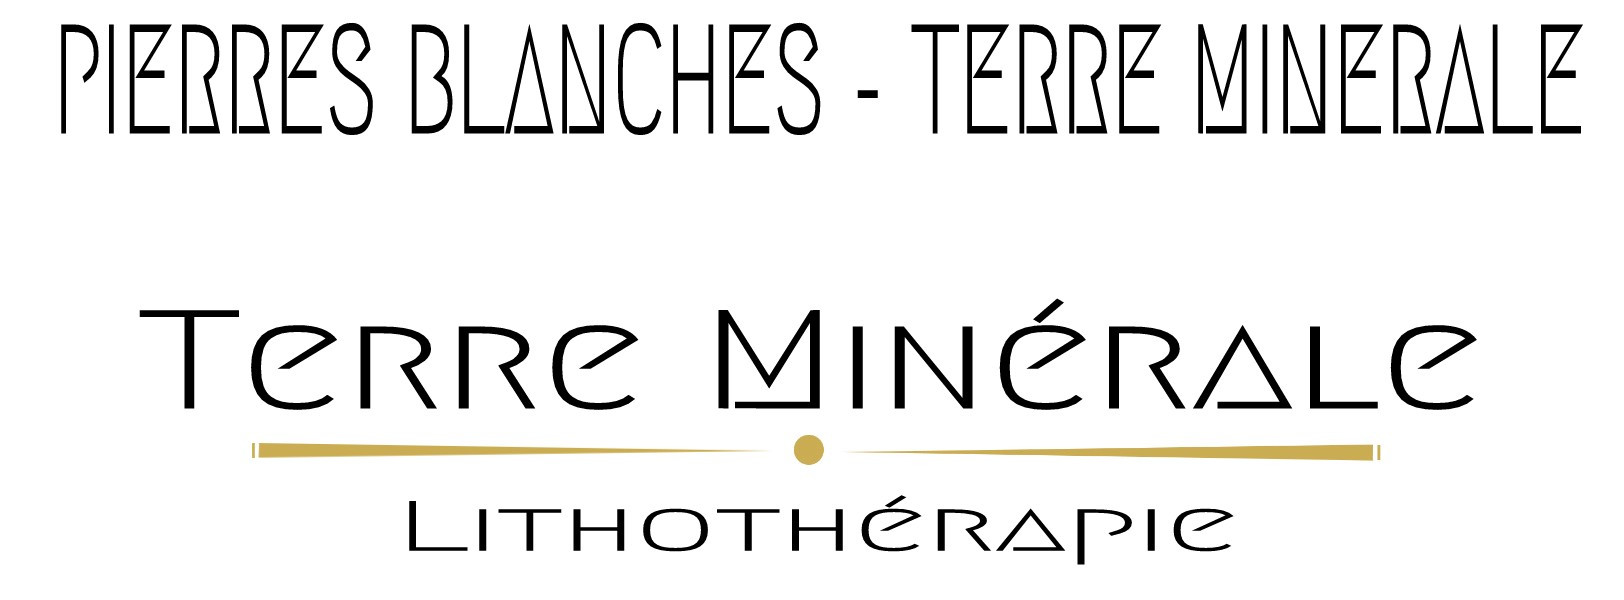 PIERRES BLANCHES - TERRE MINERALE